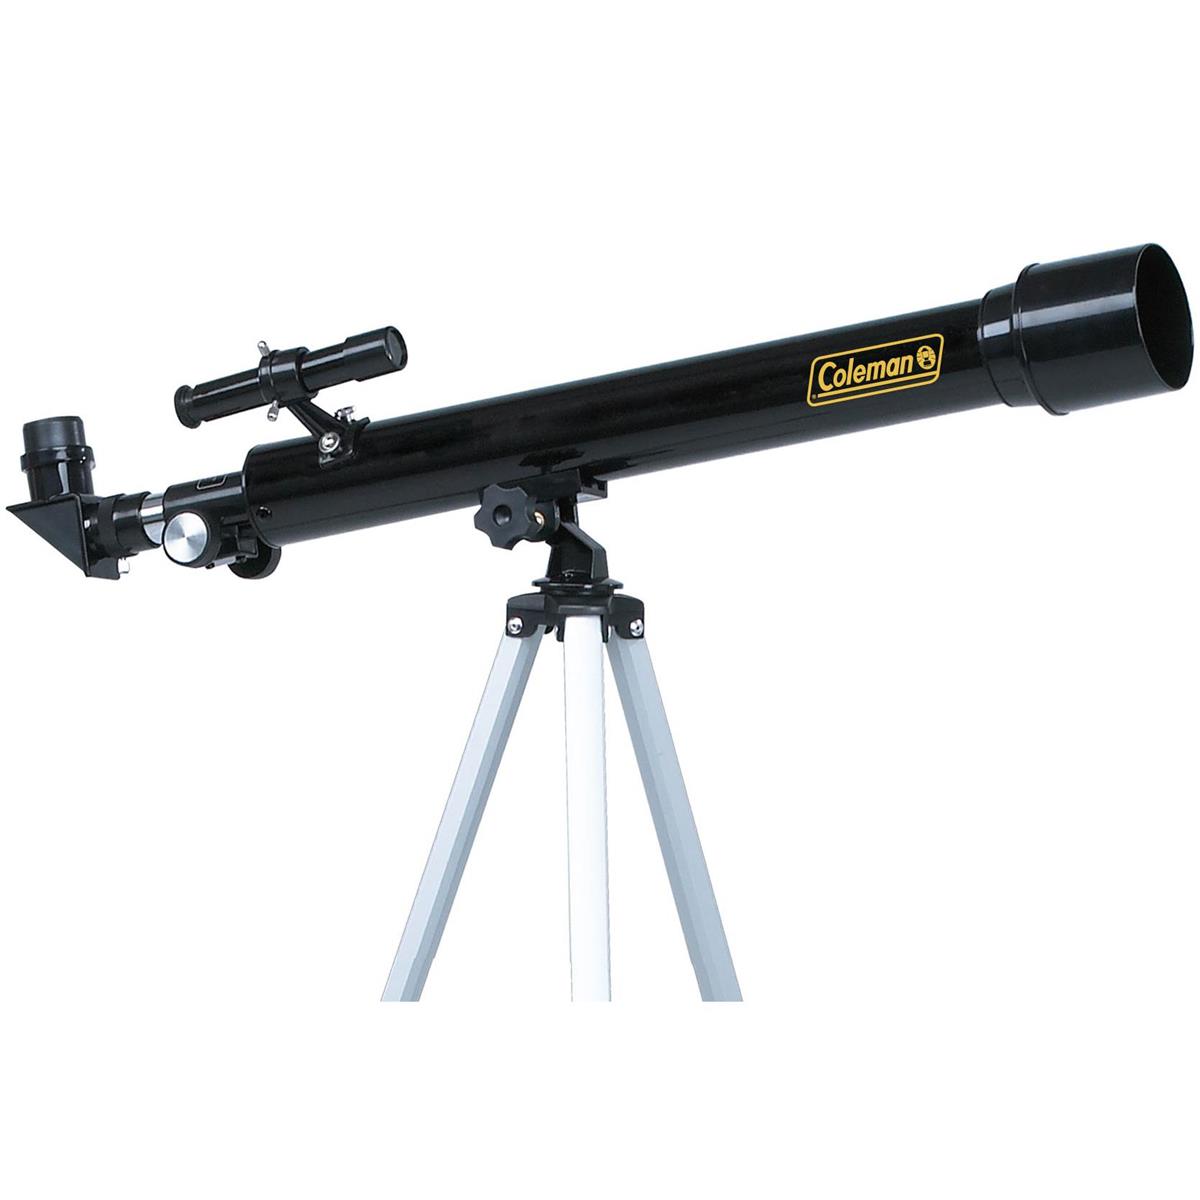 Image of Coleman Astrowatch AT50 625x50 Refractor Telescope with 5x20 Finderscope